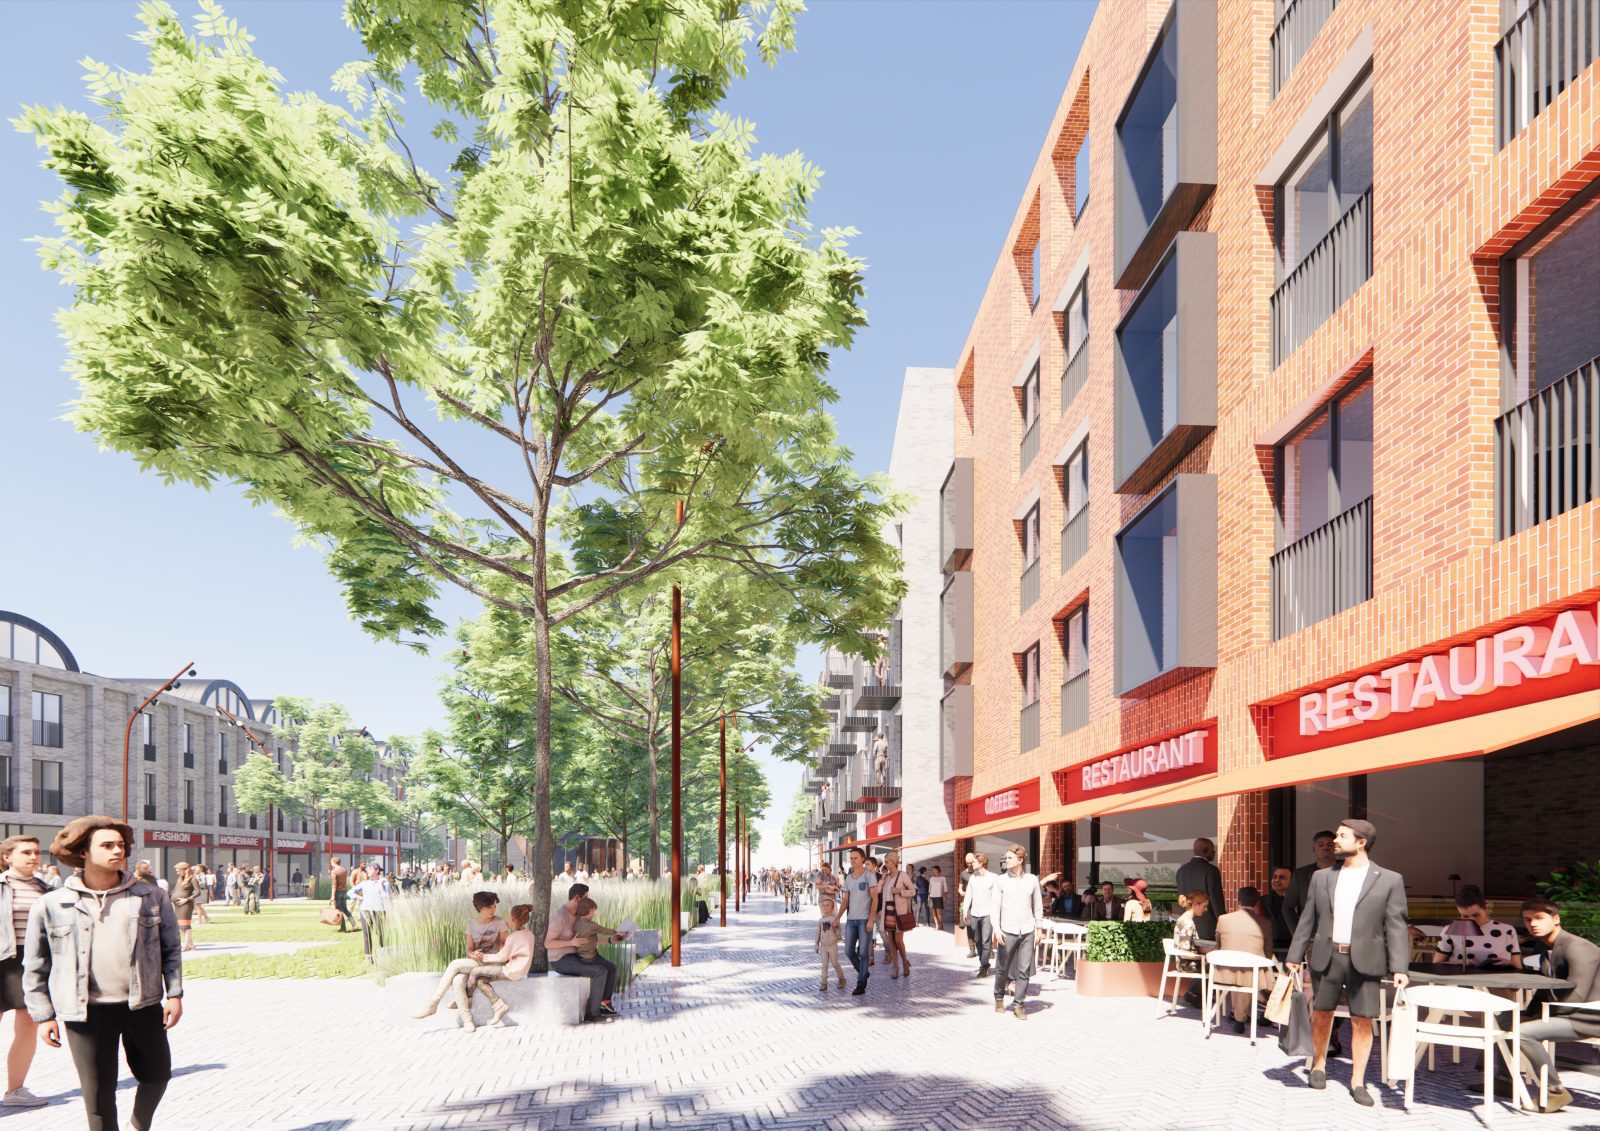 New images give a closer look at the £50 million town centre redevelopment in Farnworth, The Manc